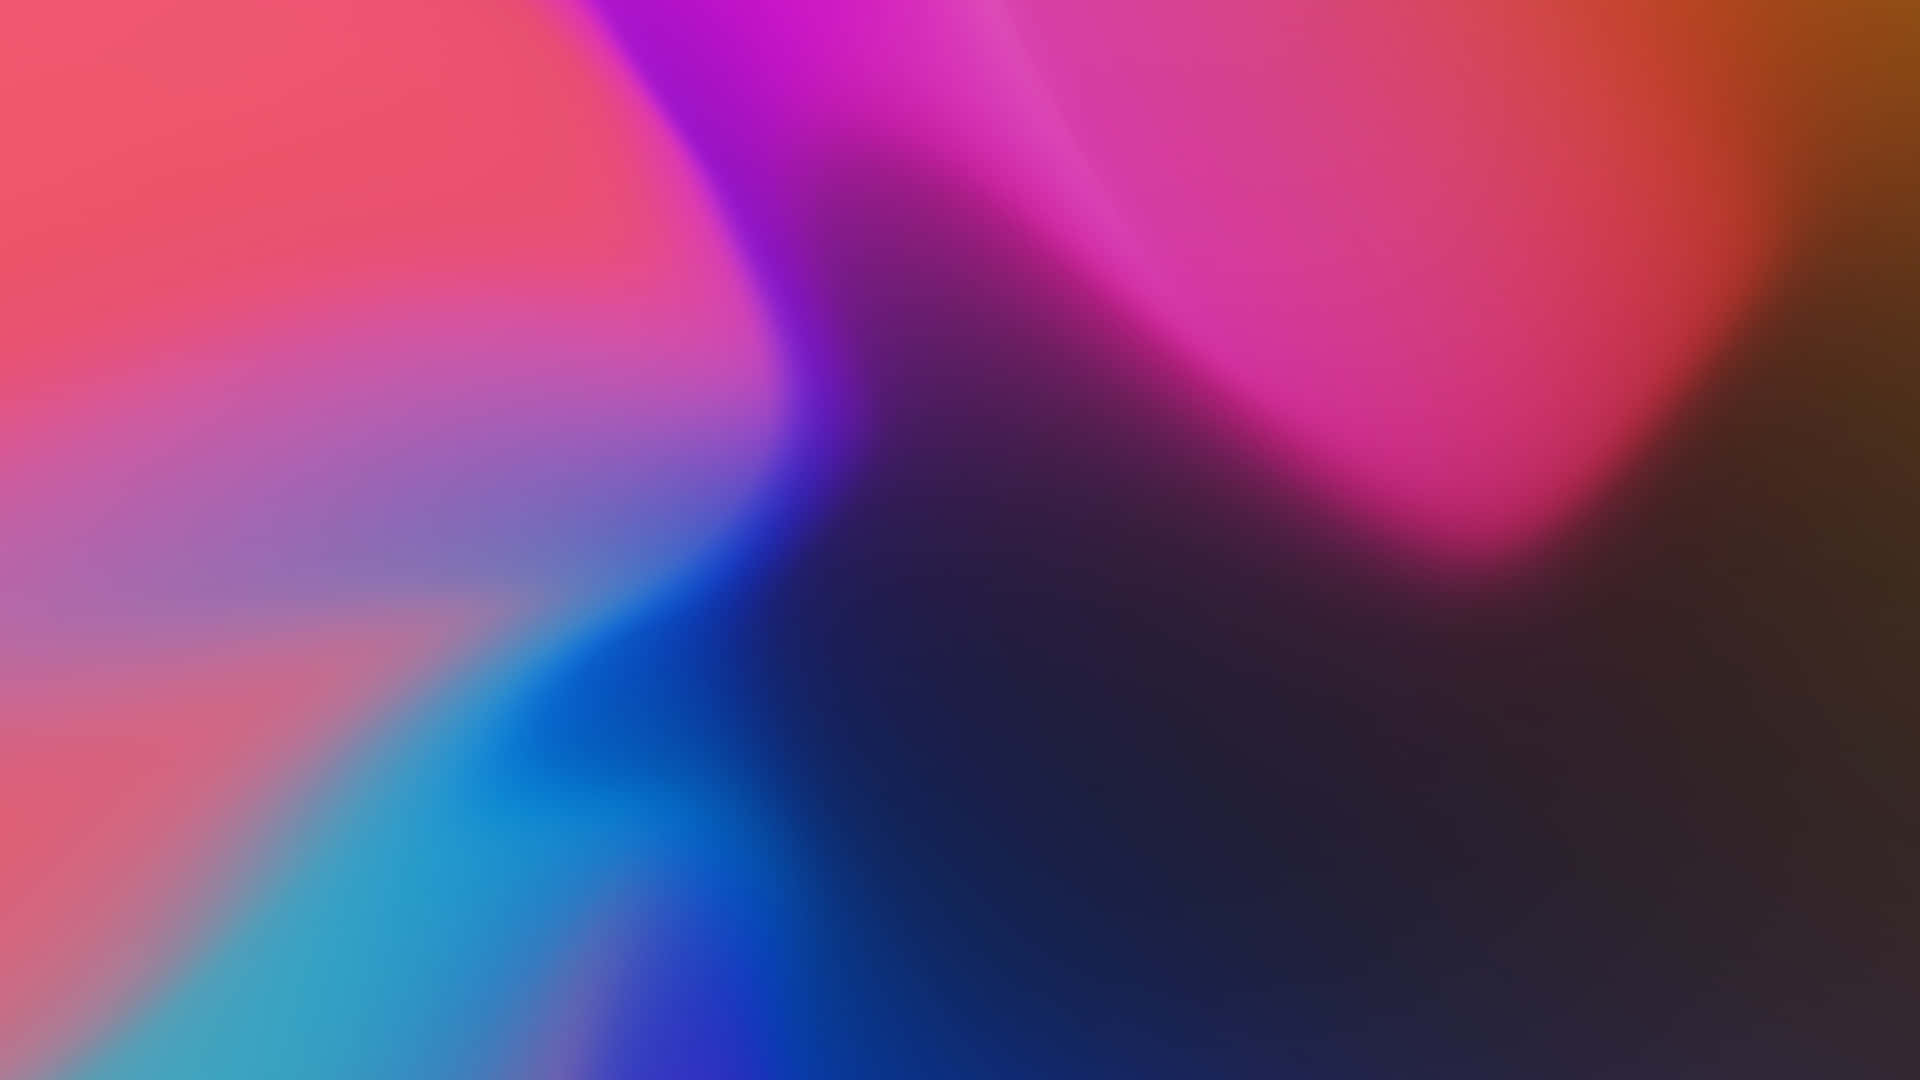 A Colorful Abstract Background With A Rainbow Colored Background